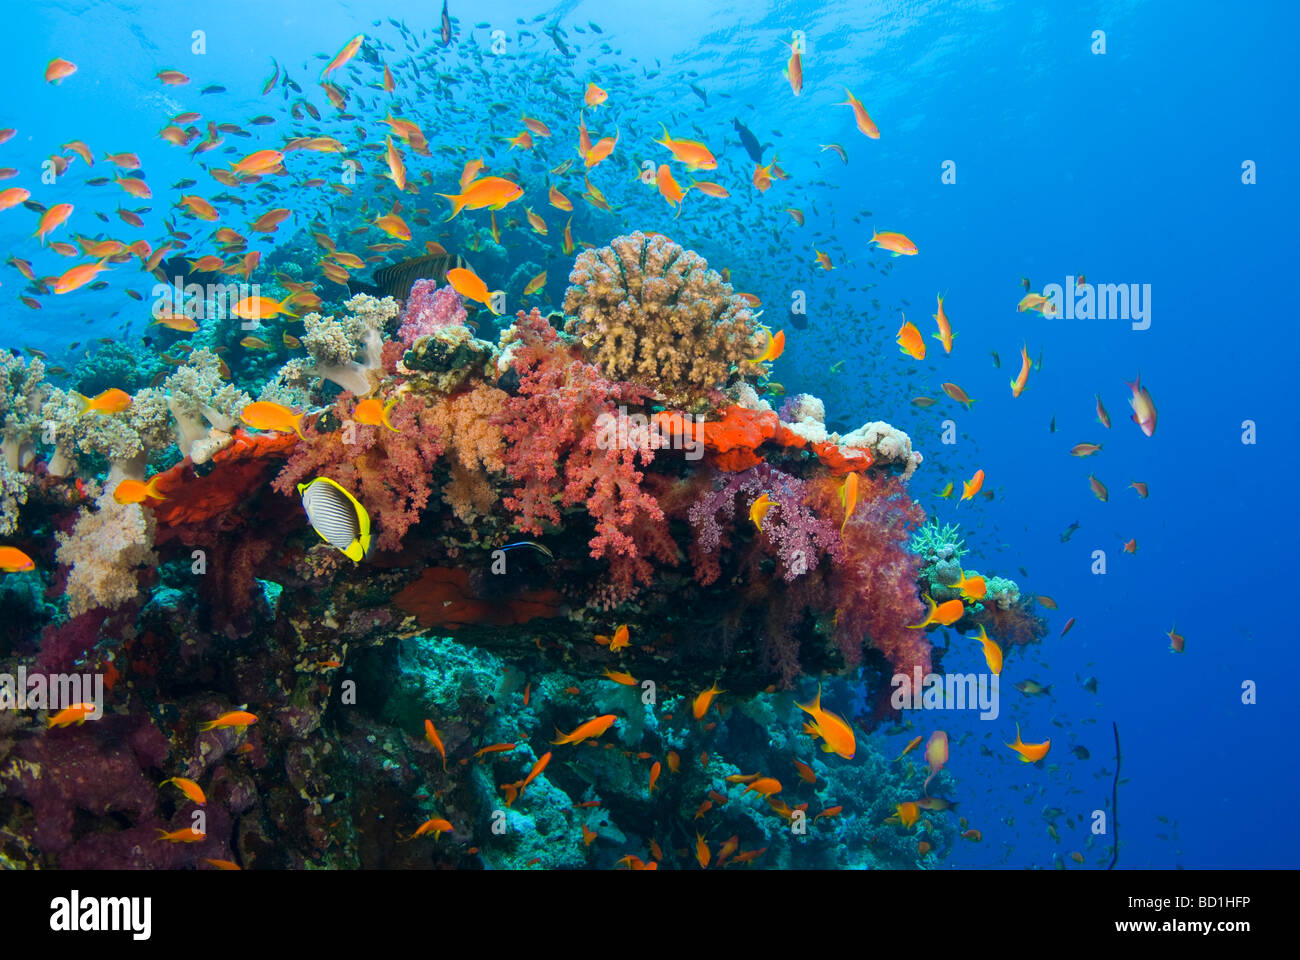 Colorful coral reef scene with purple soft corals and anthias. Safaga, Red Sea Stock Photo